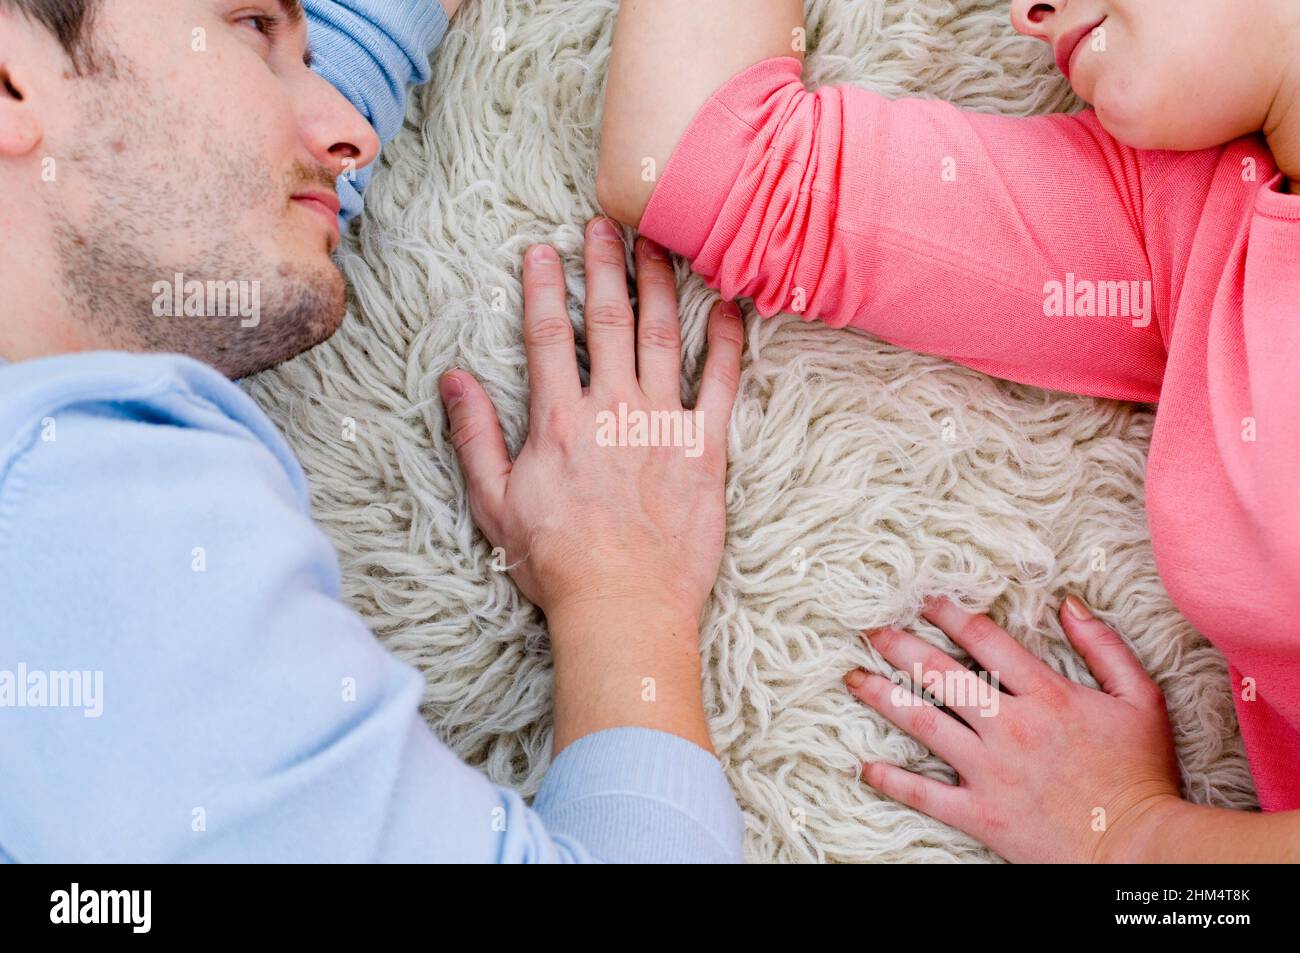 Close-Up Of A Young Couple Laying On A Carpet, Credit:Photoshot Creative / Stuart Cox / Avalon Stock Photo